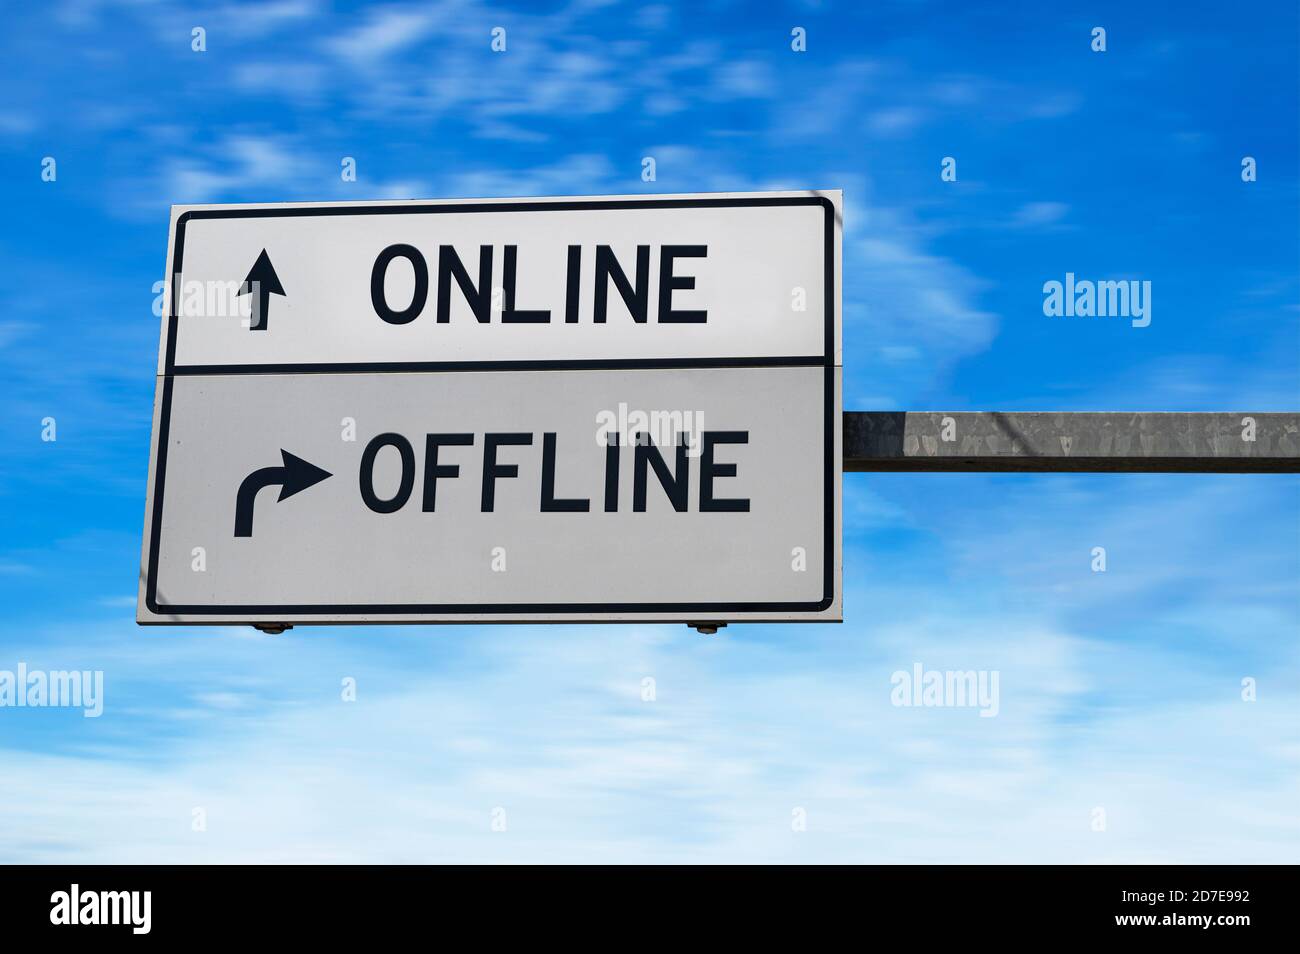 Online versus offline. White two street signs with arrow on metal pole. Directional road. Crossroads Road Sign, Two Arrow. Blue sky background. Stock Photo